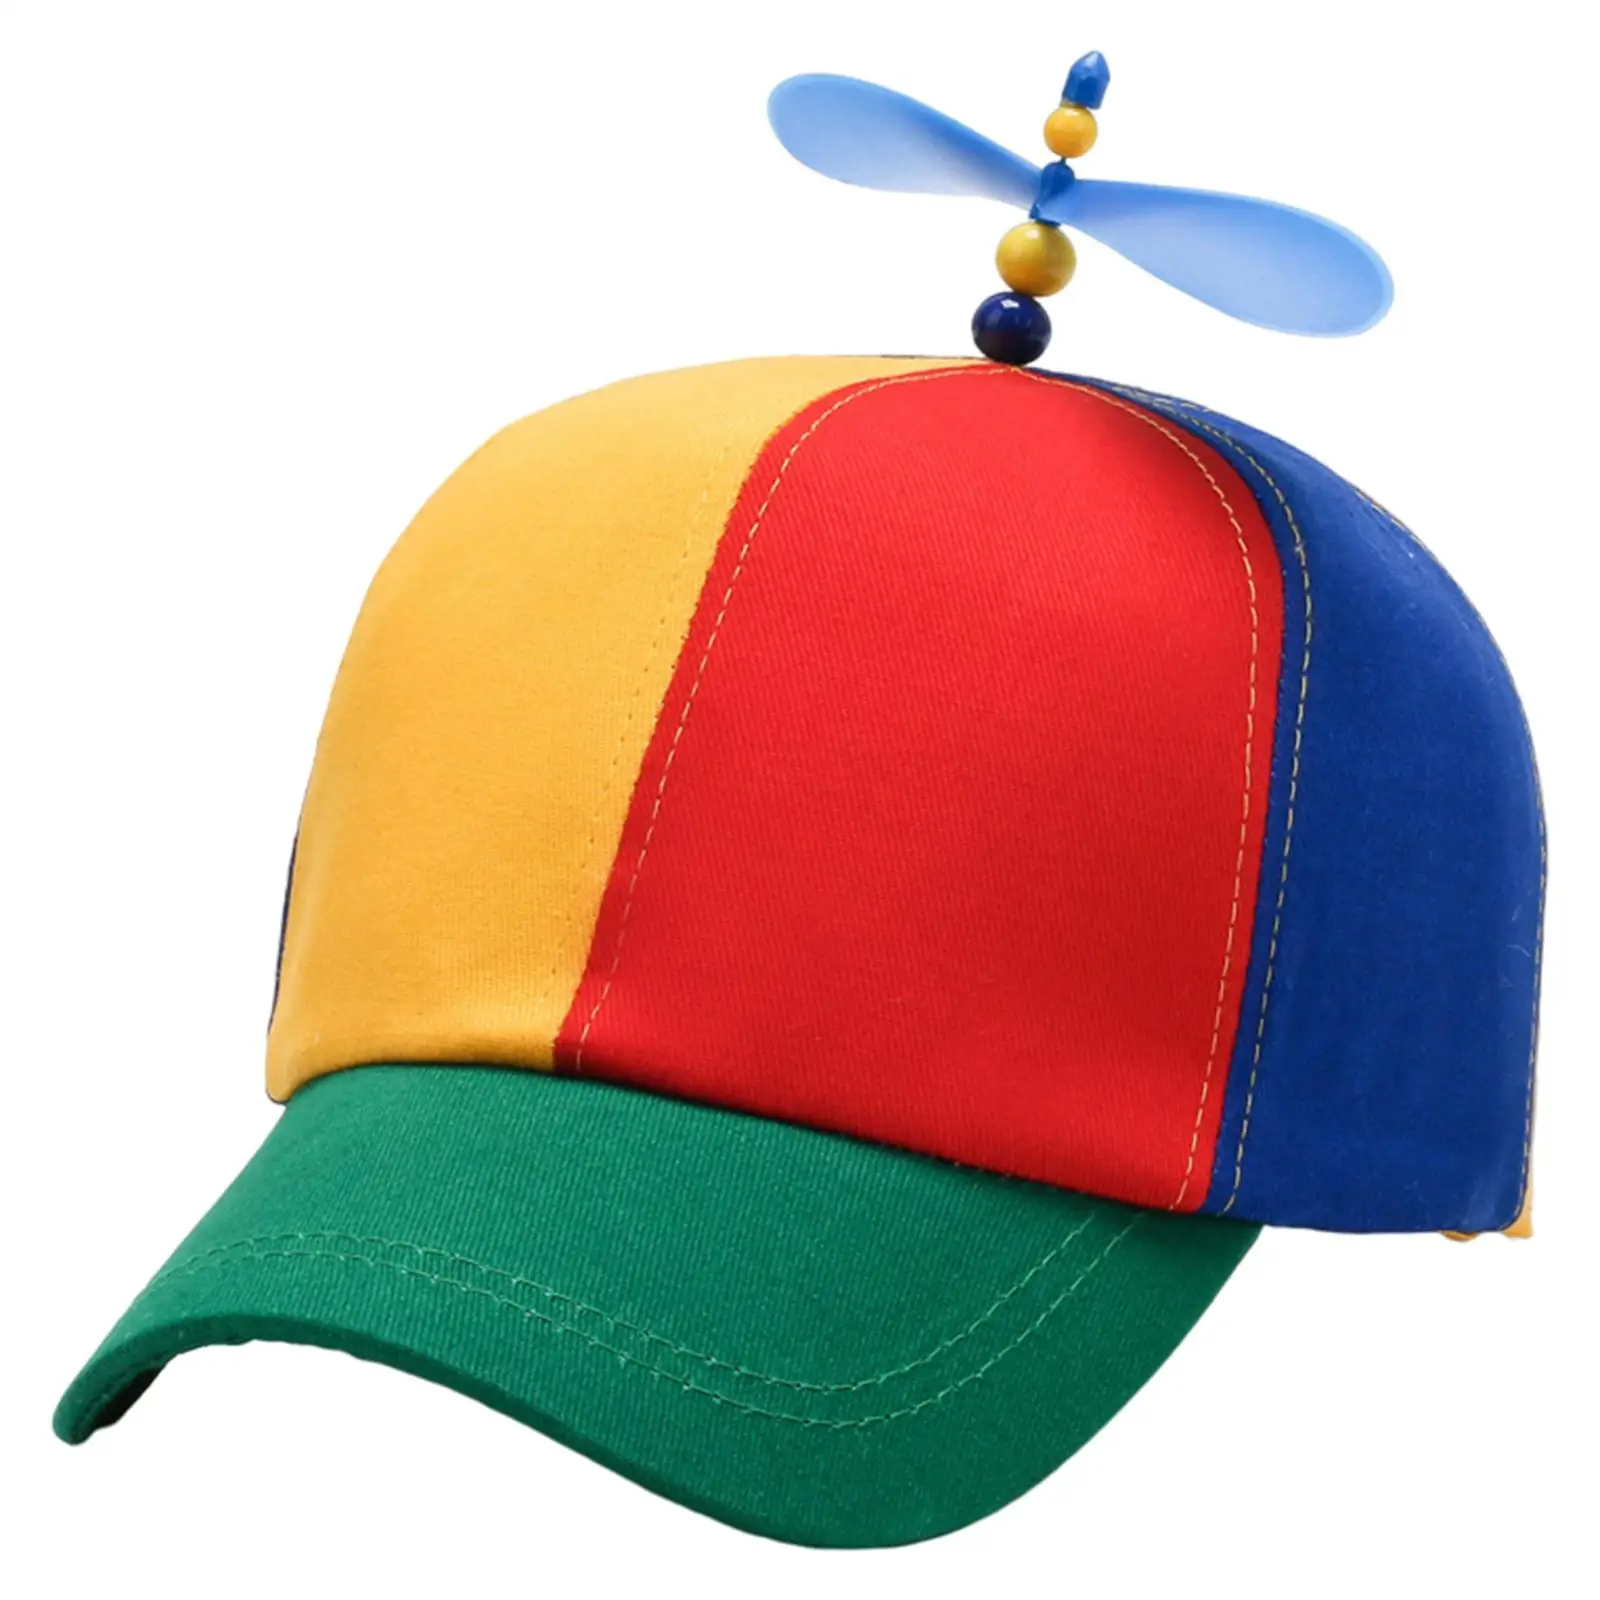 Colorful Propeller Hat, Decoration Party Hat Funny Novelty Fashion Baseball Hat for Daily Wear Outdoor Travel Sports Adult